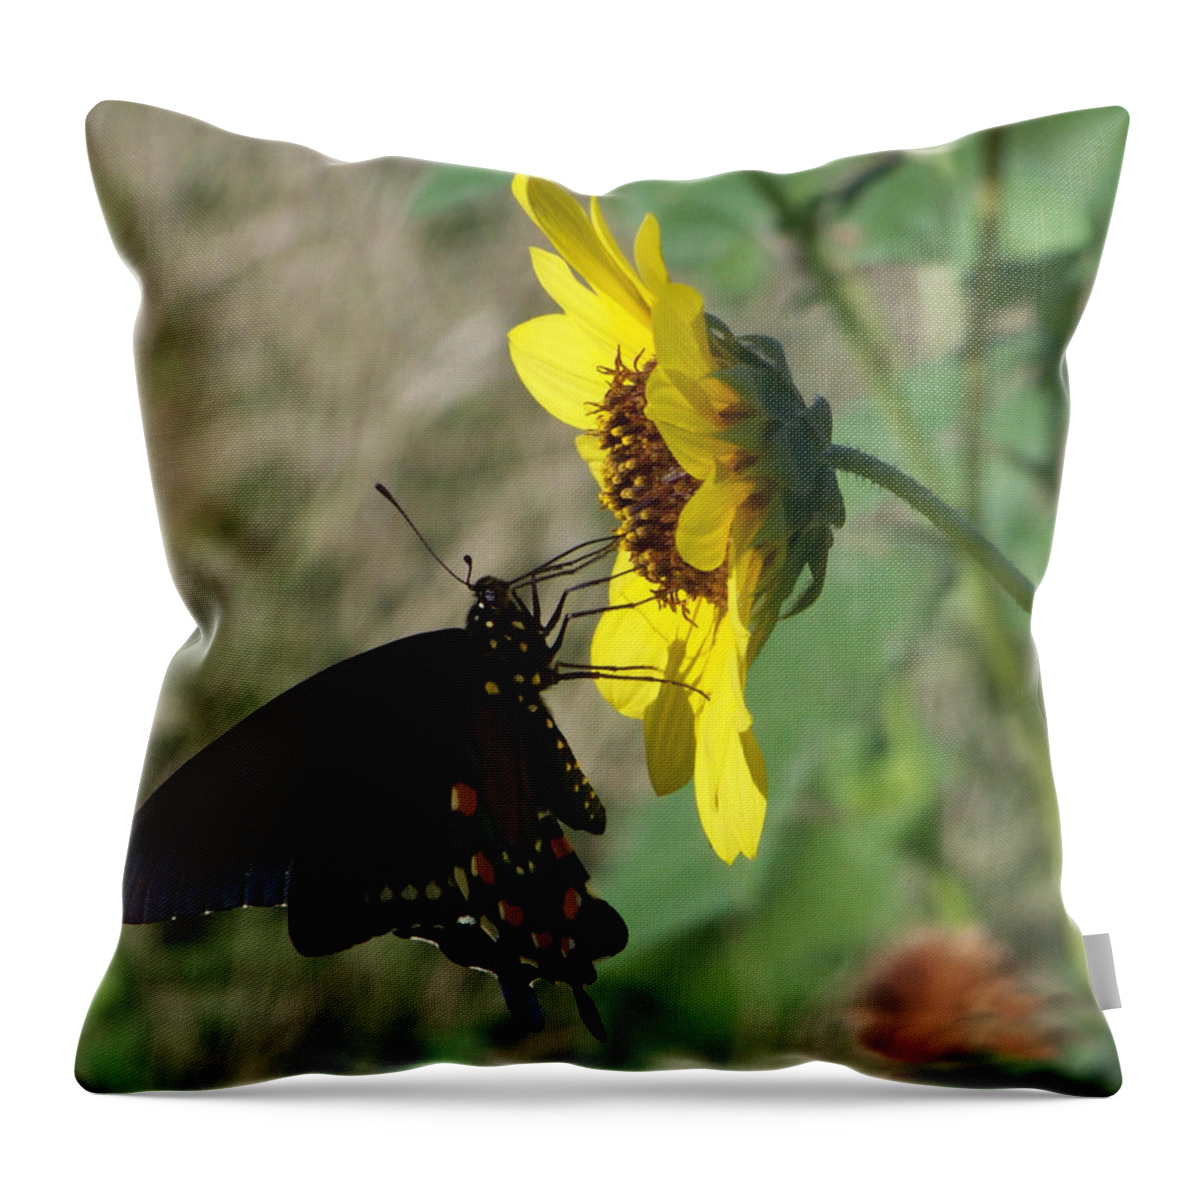 Black Throw Pillow featuring the photograph Black Butterfly by Leticia Latocki